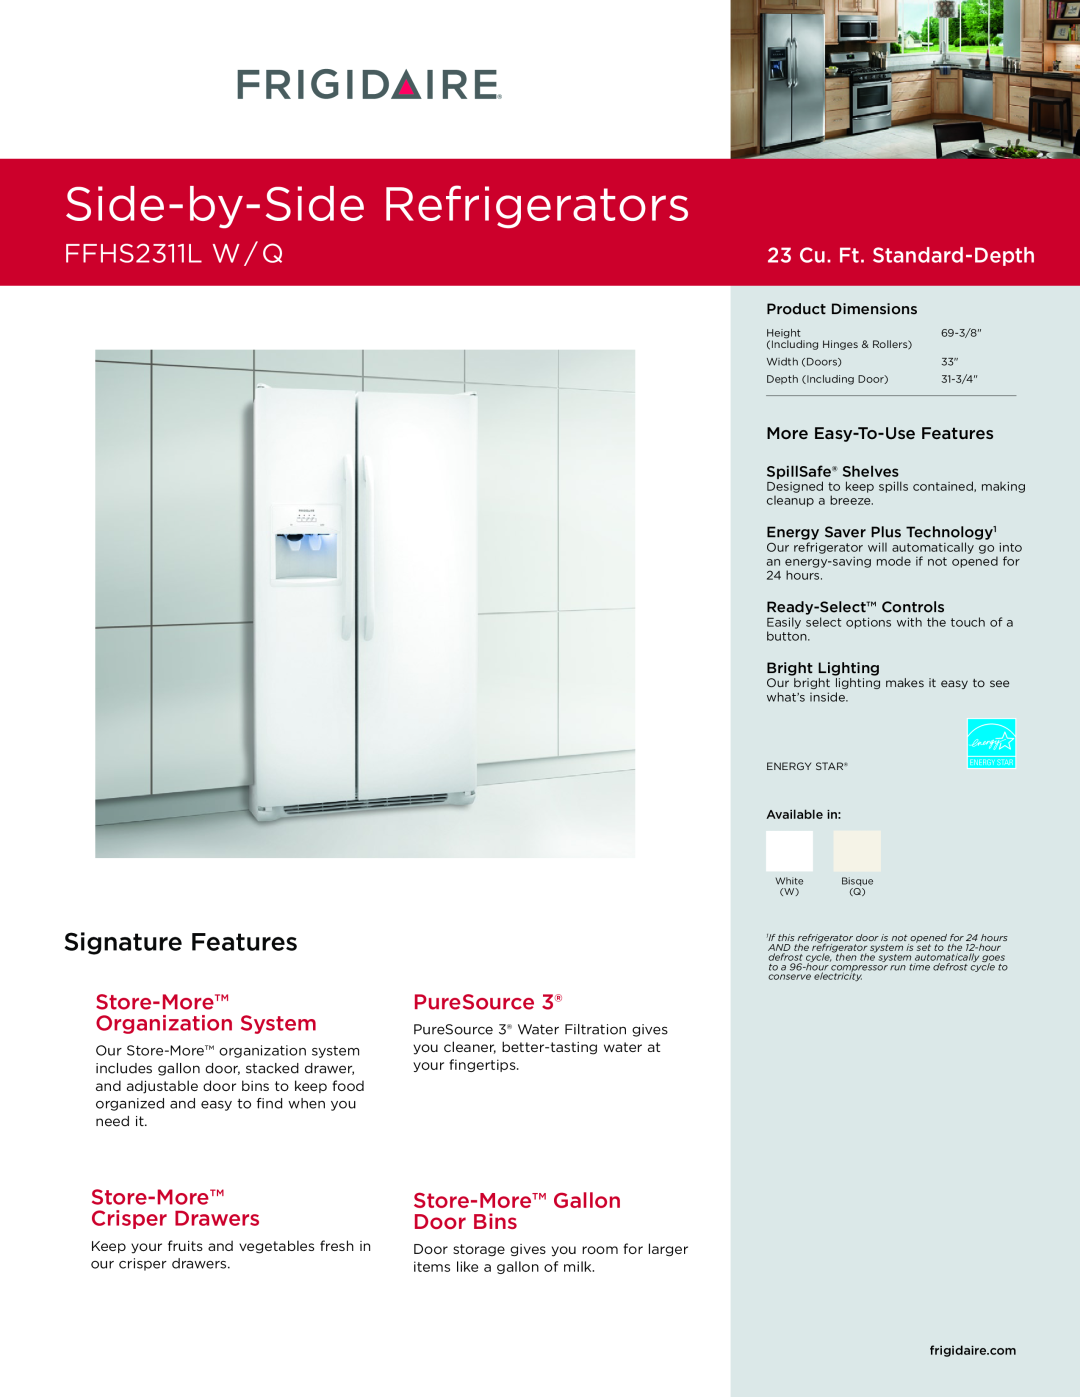 Frigidaire FFHS2311L W/Q dimensions Side-by-SideRefrigerators, FFHS2311L W / Q, Signature Features, PureSource, Store-More 